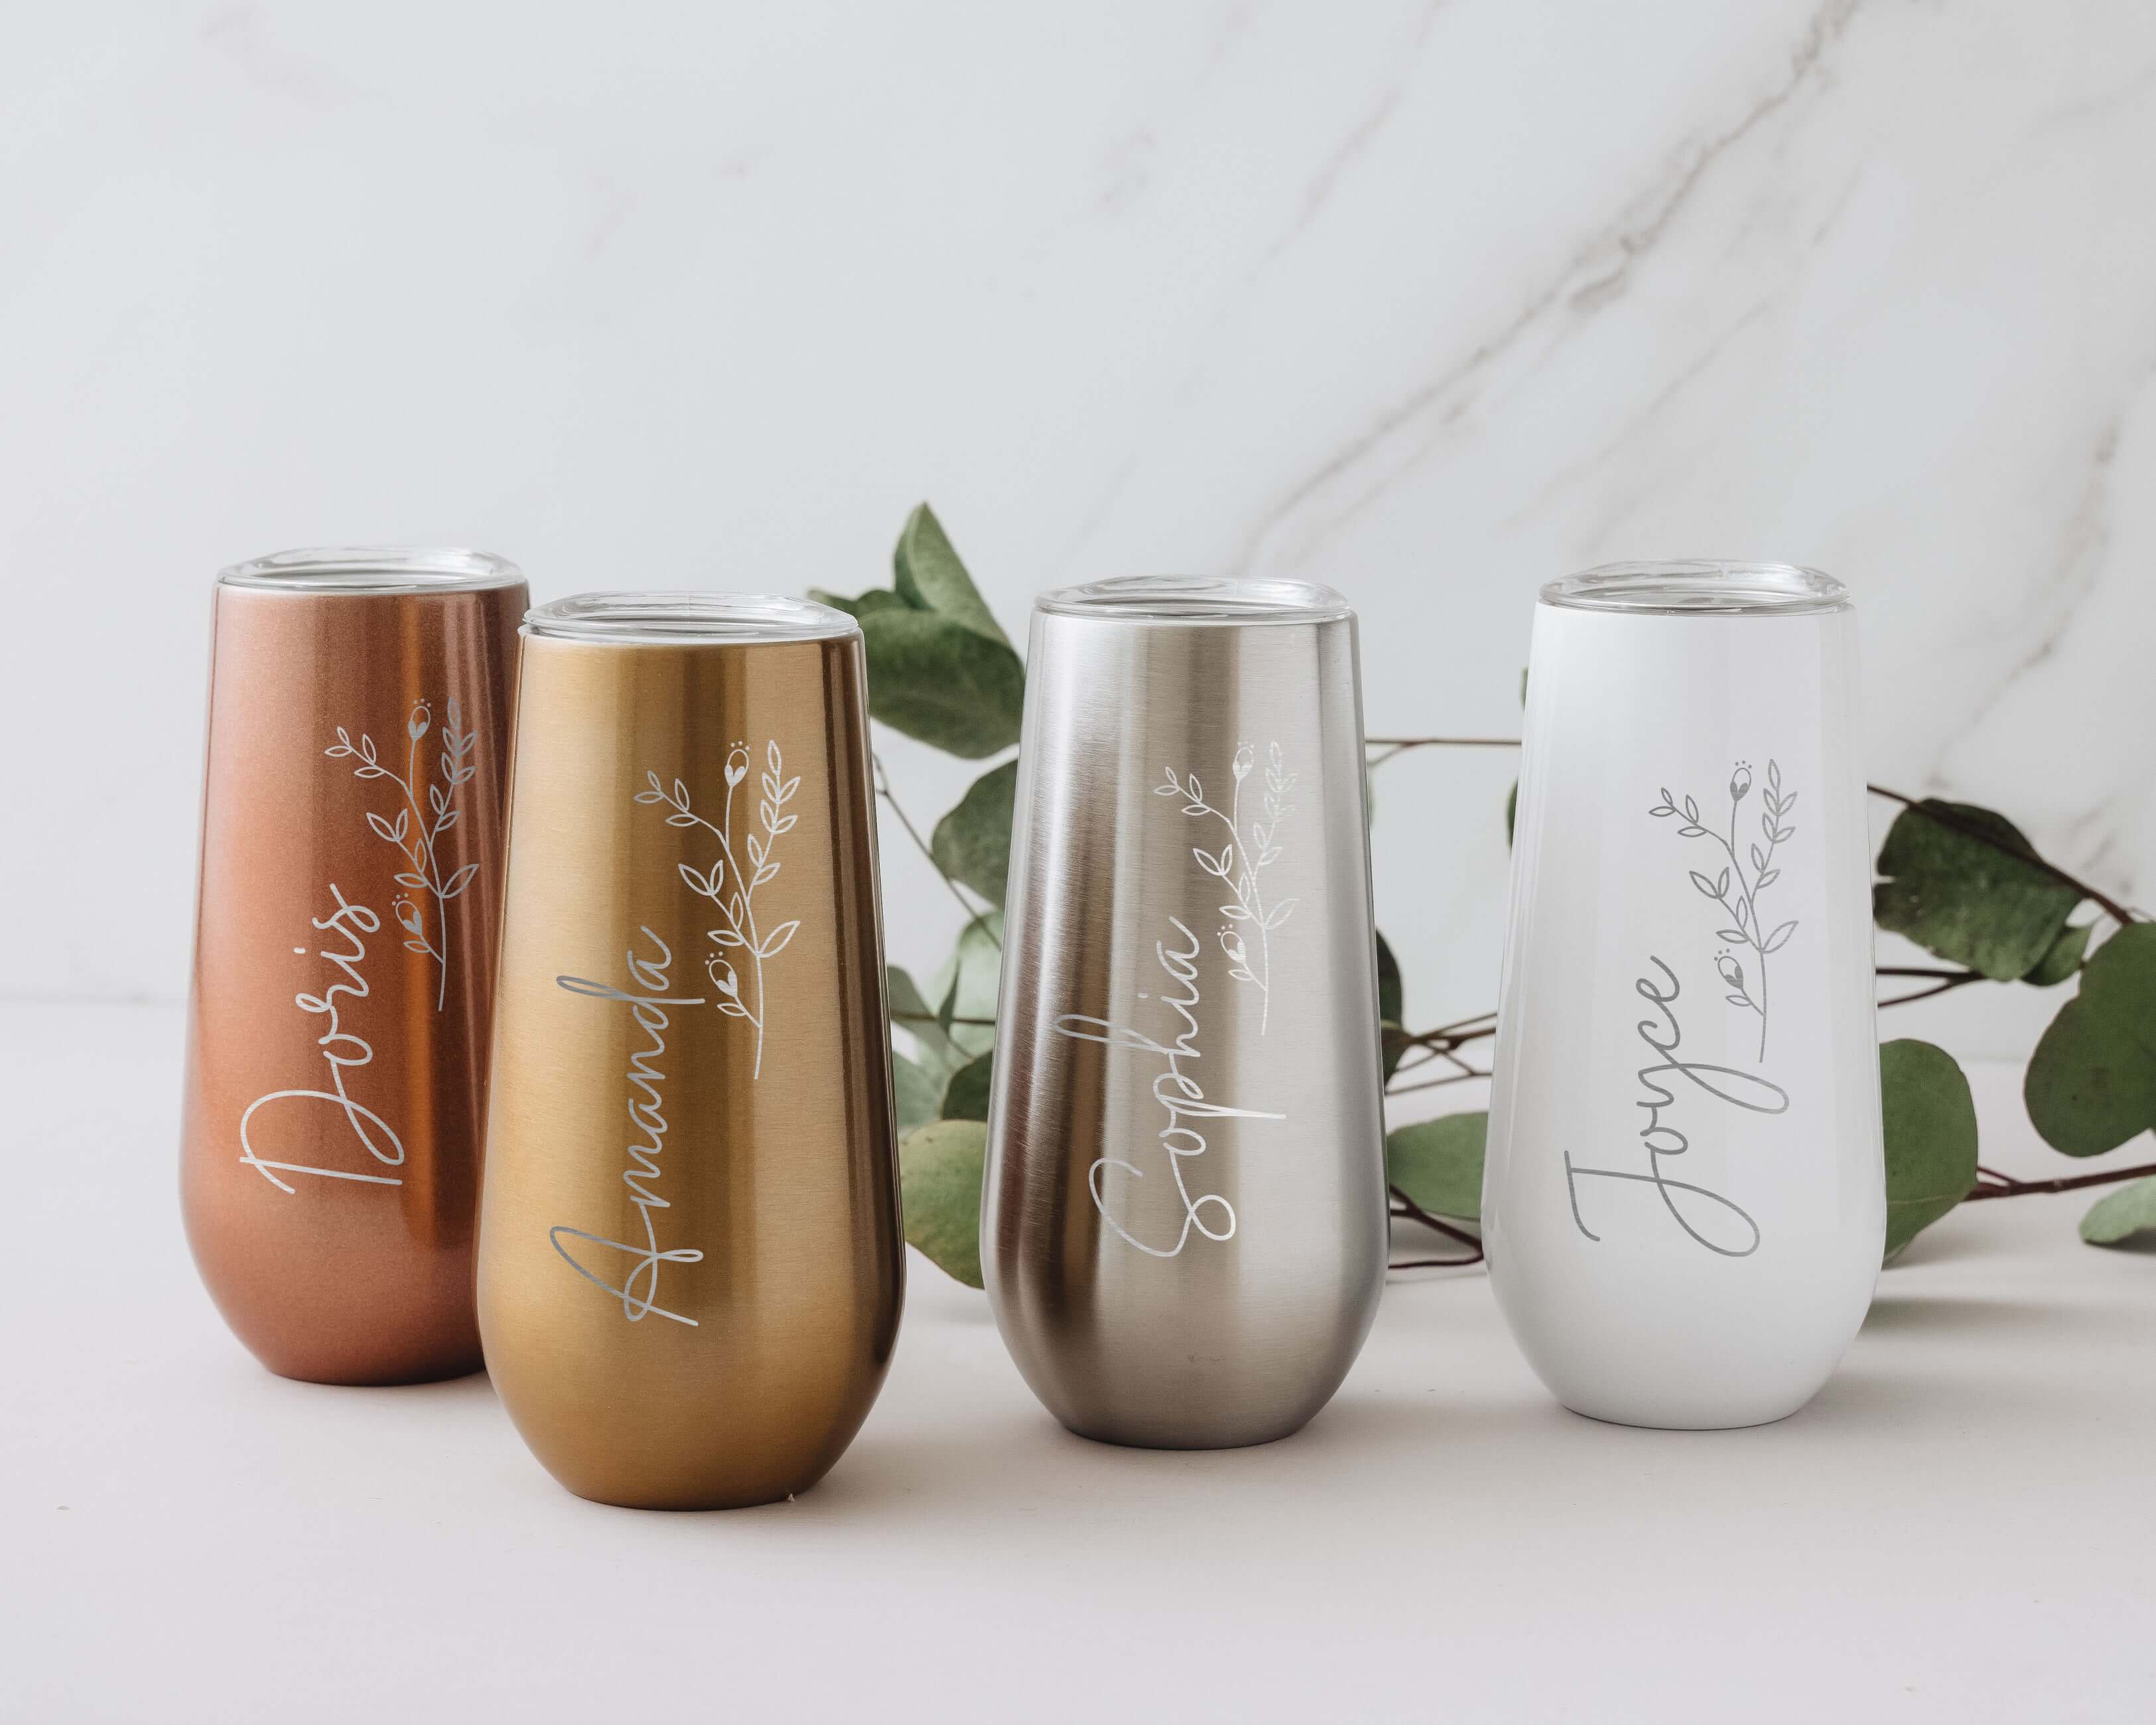 Bridesmaid Tumbler - Customize bridesmaid gifts with personalized bridesmaid tumblers, available in gold, silver, rose gold, and white colors. These tumblers feature their names, making them the perfect addition to any bridesmaid gifts box.